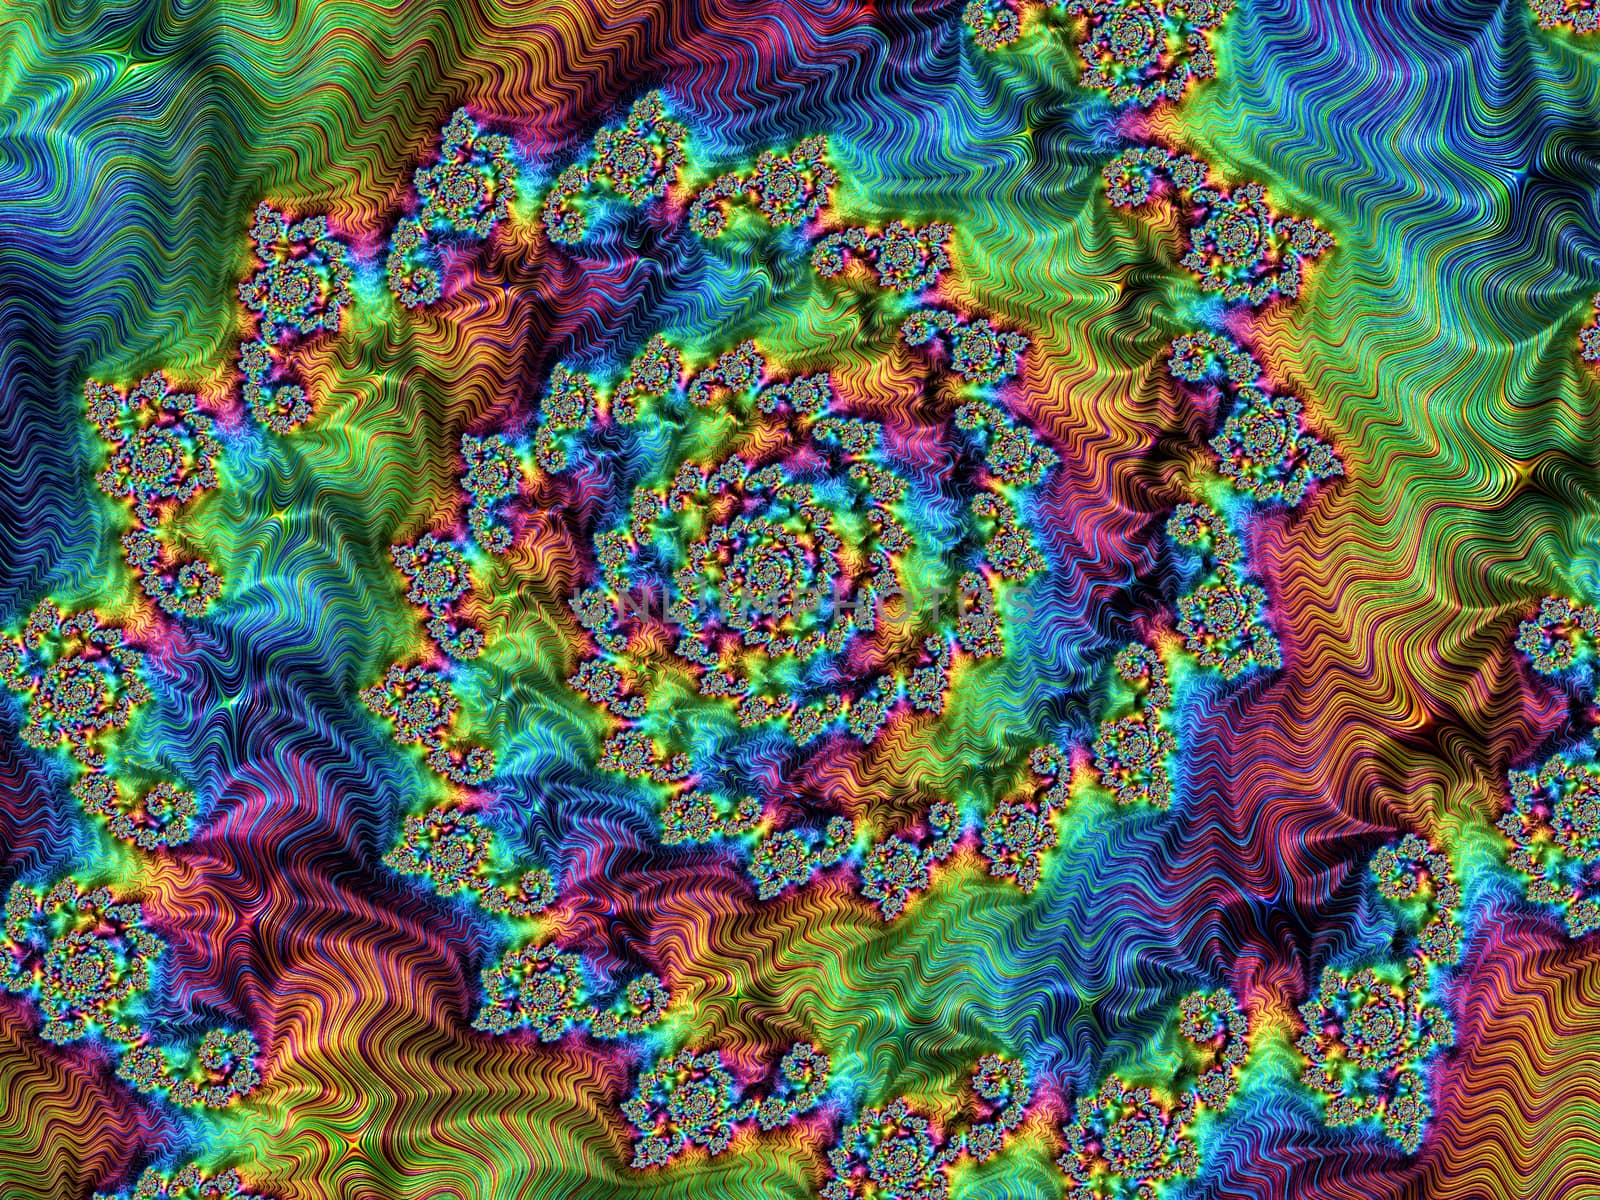 Abstract fractal background - computer-generated image. Digital art - classic fractal geometry - bright glossy spiral repeated many times in different sizes. For prints, puzzles, covers.